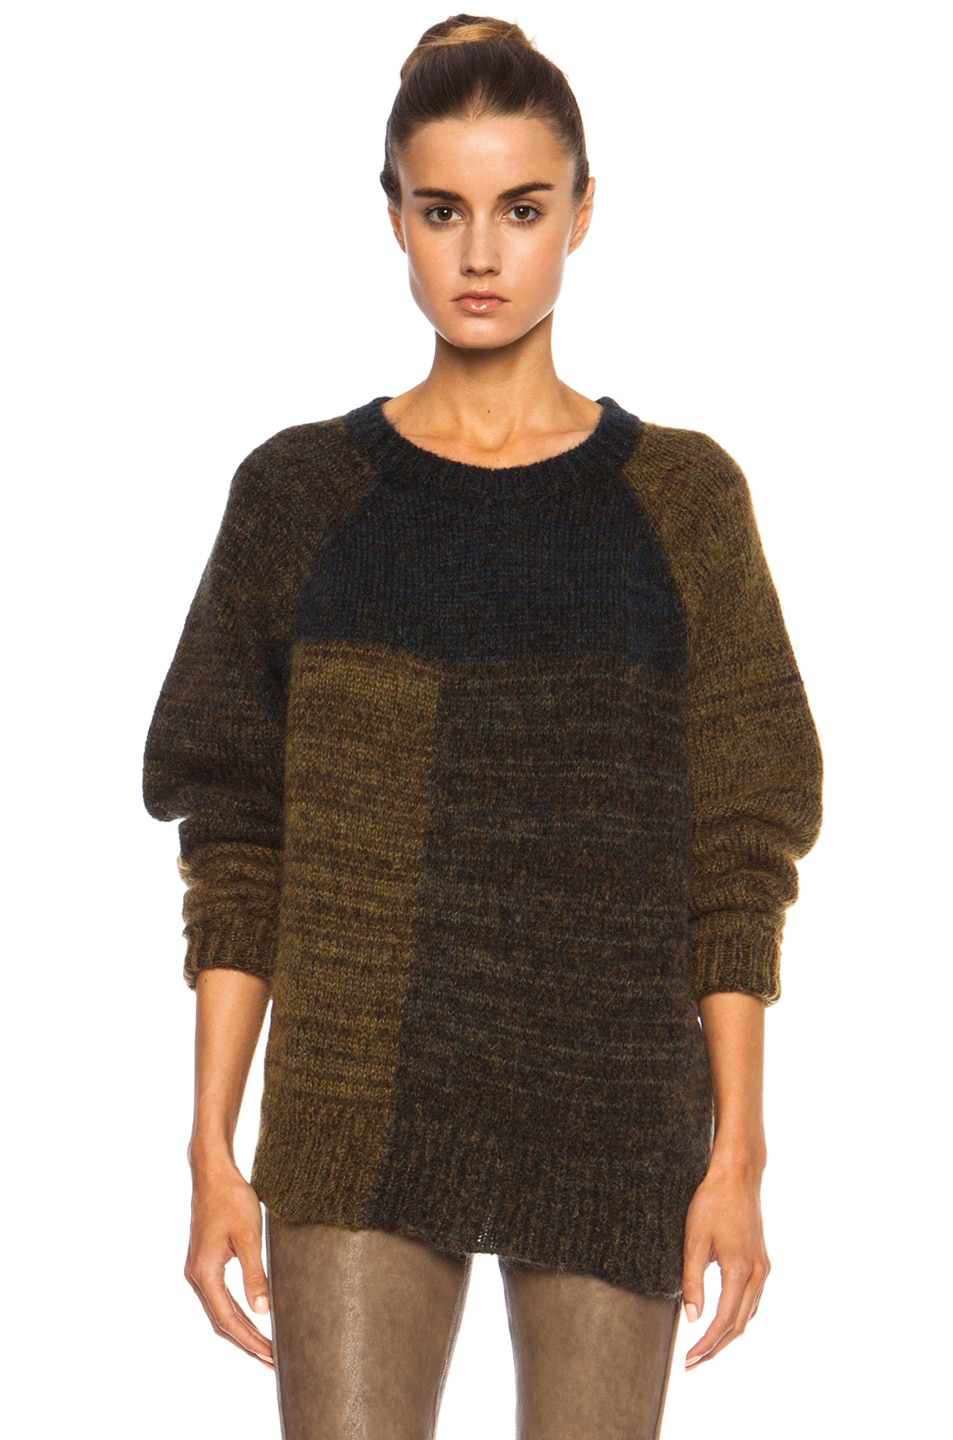 Isabel Marant Naoko Patch Mohair-Blend Sweater in Bronze | FWRD